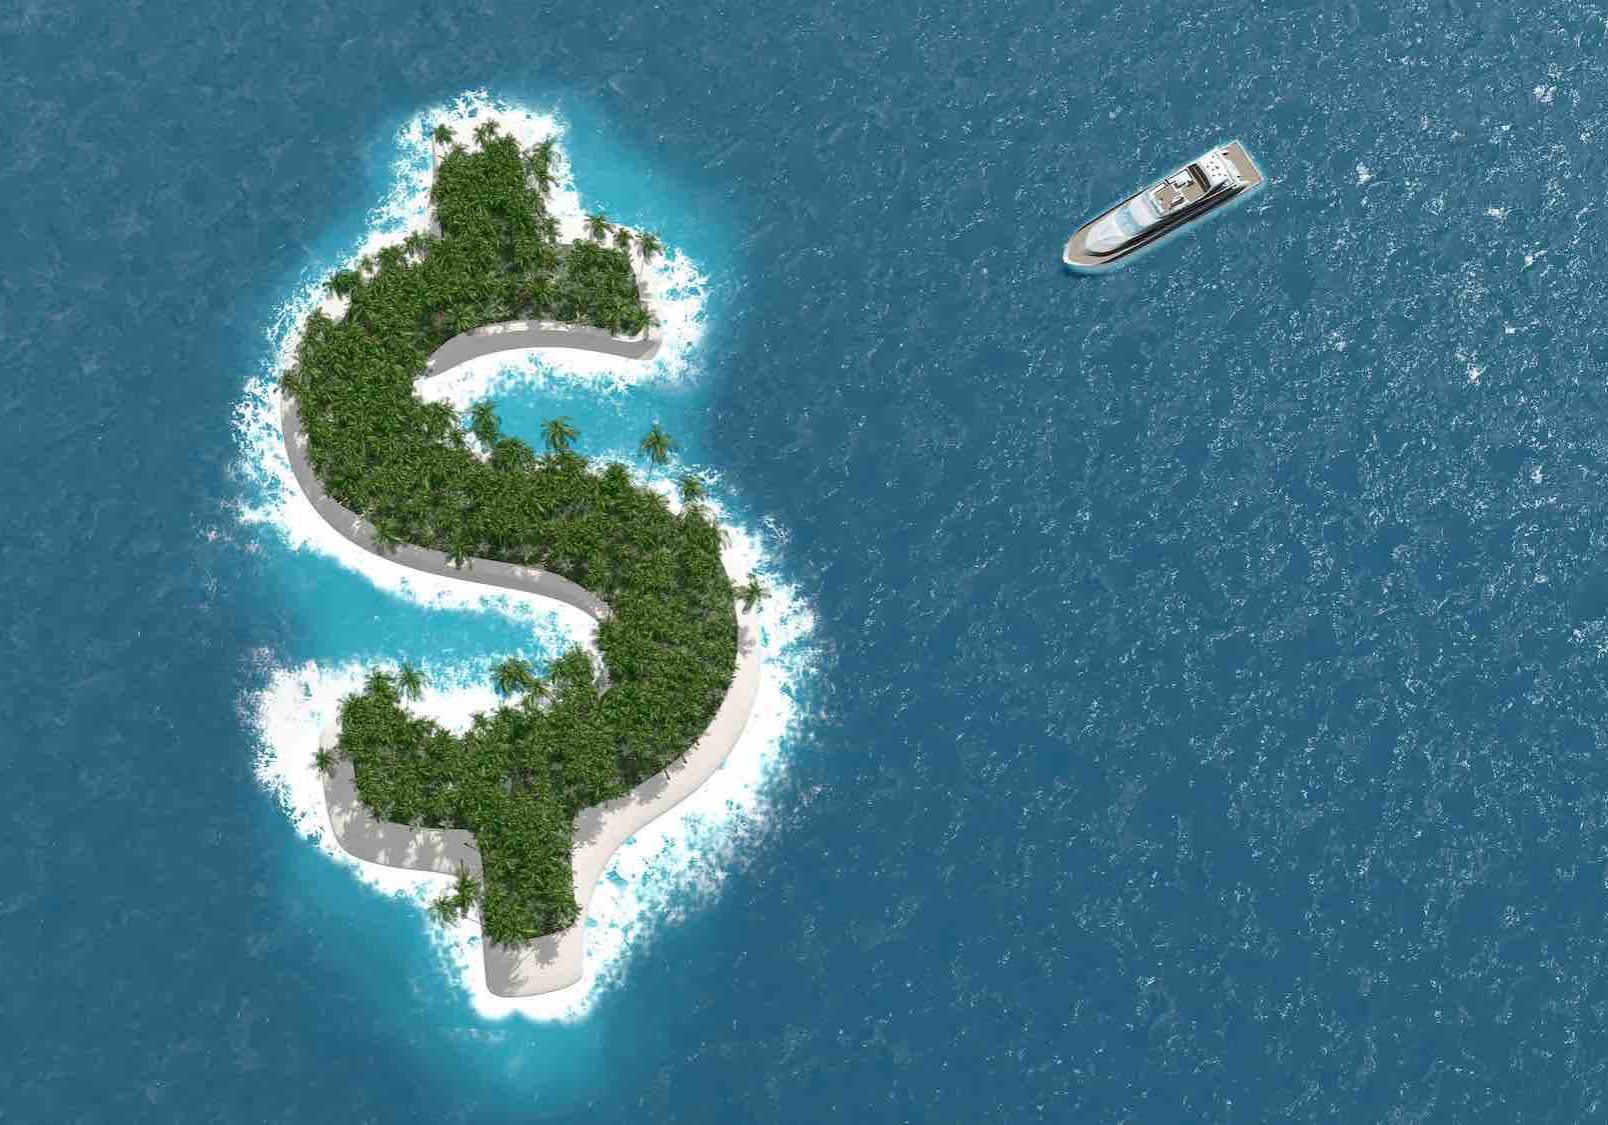 Tax haven, financial or wealth evasion on a dollar shaped island. A luxury boat is sailing to the island.